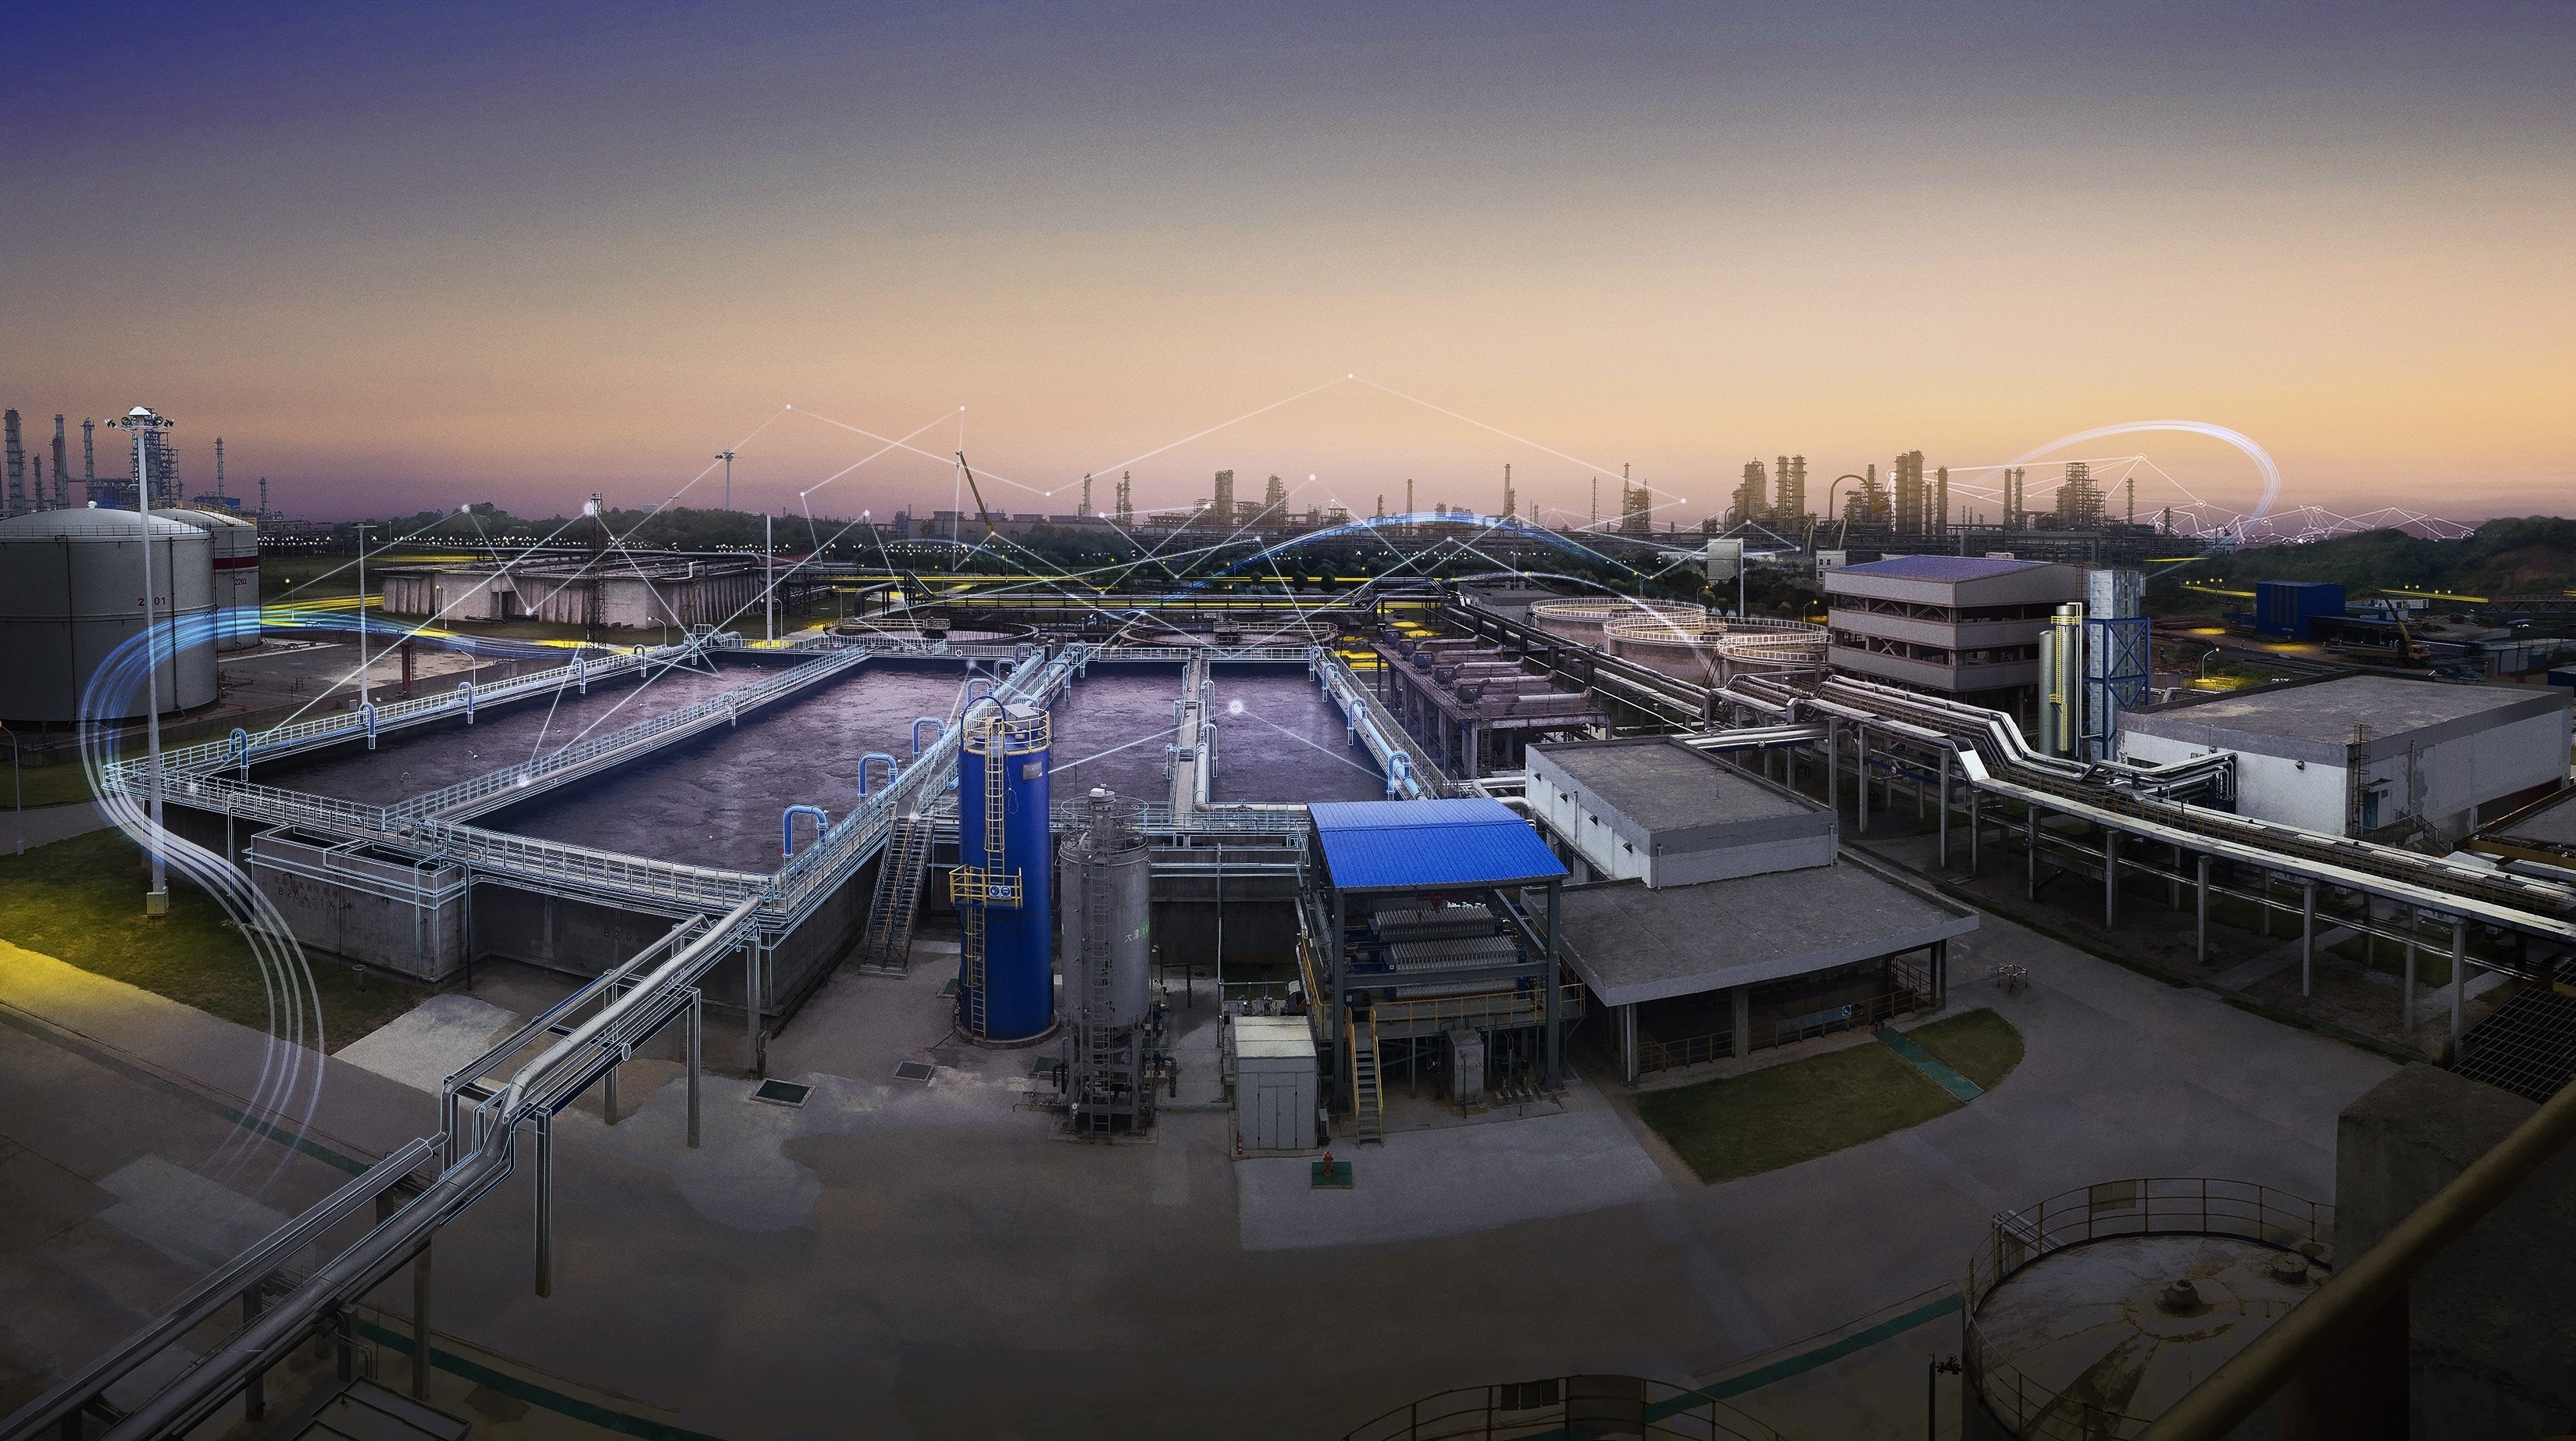 Biological Wastewater Treatment Using Regenerated Activated Carbon Saves Disposal Costs